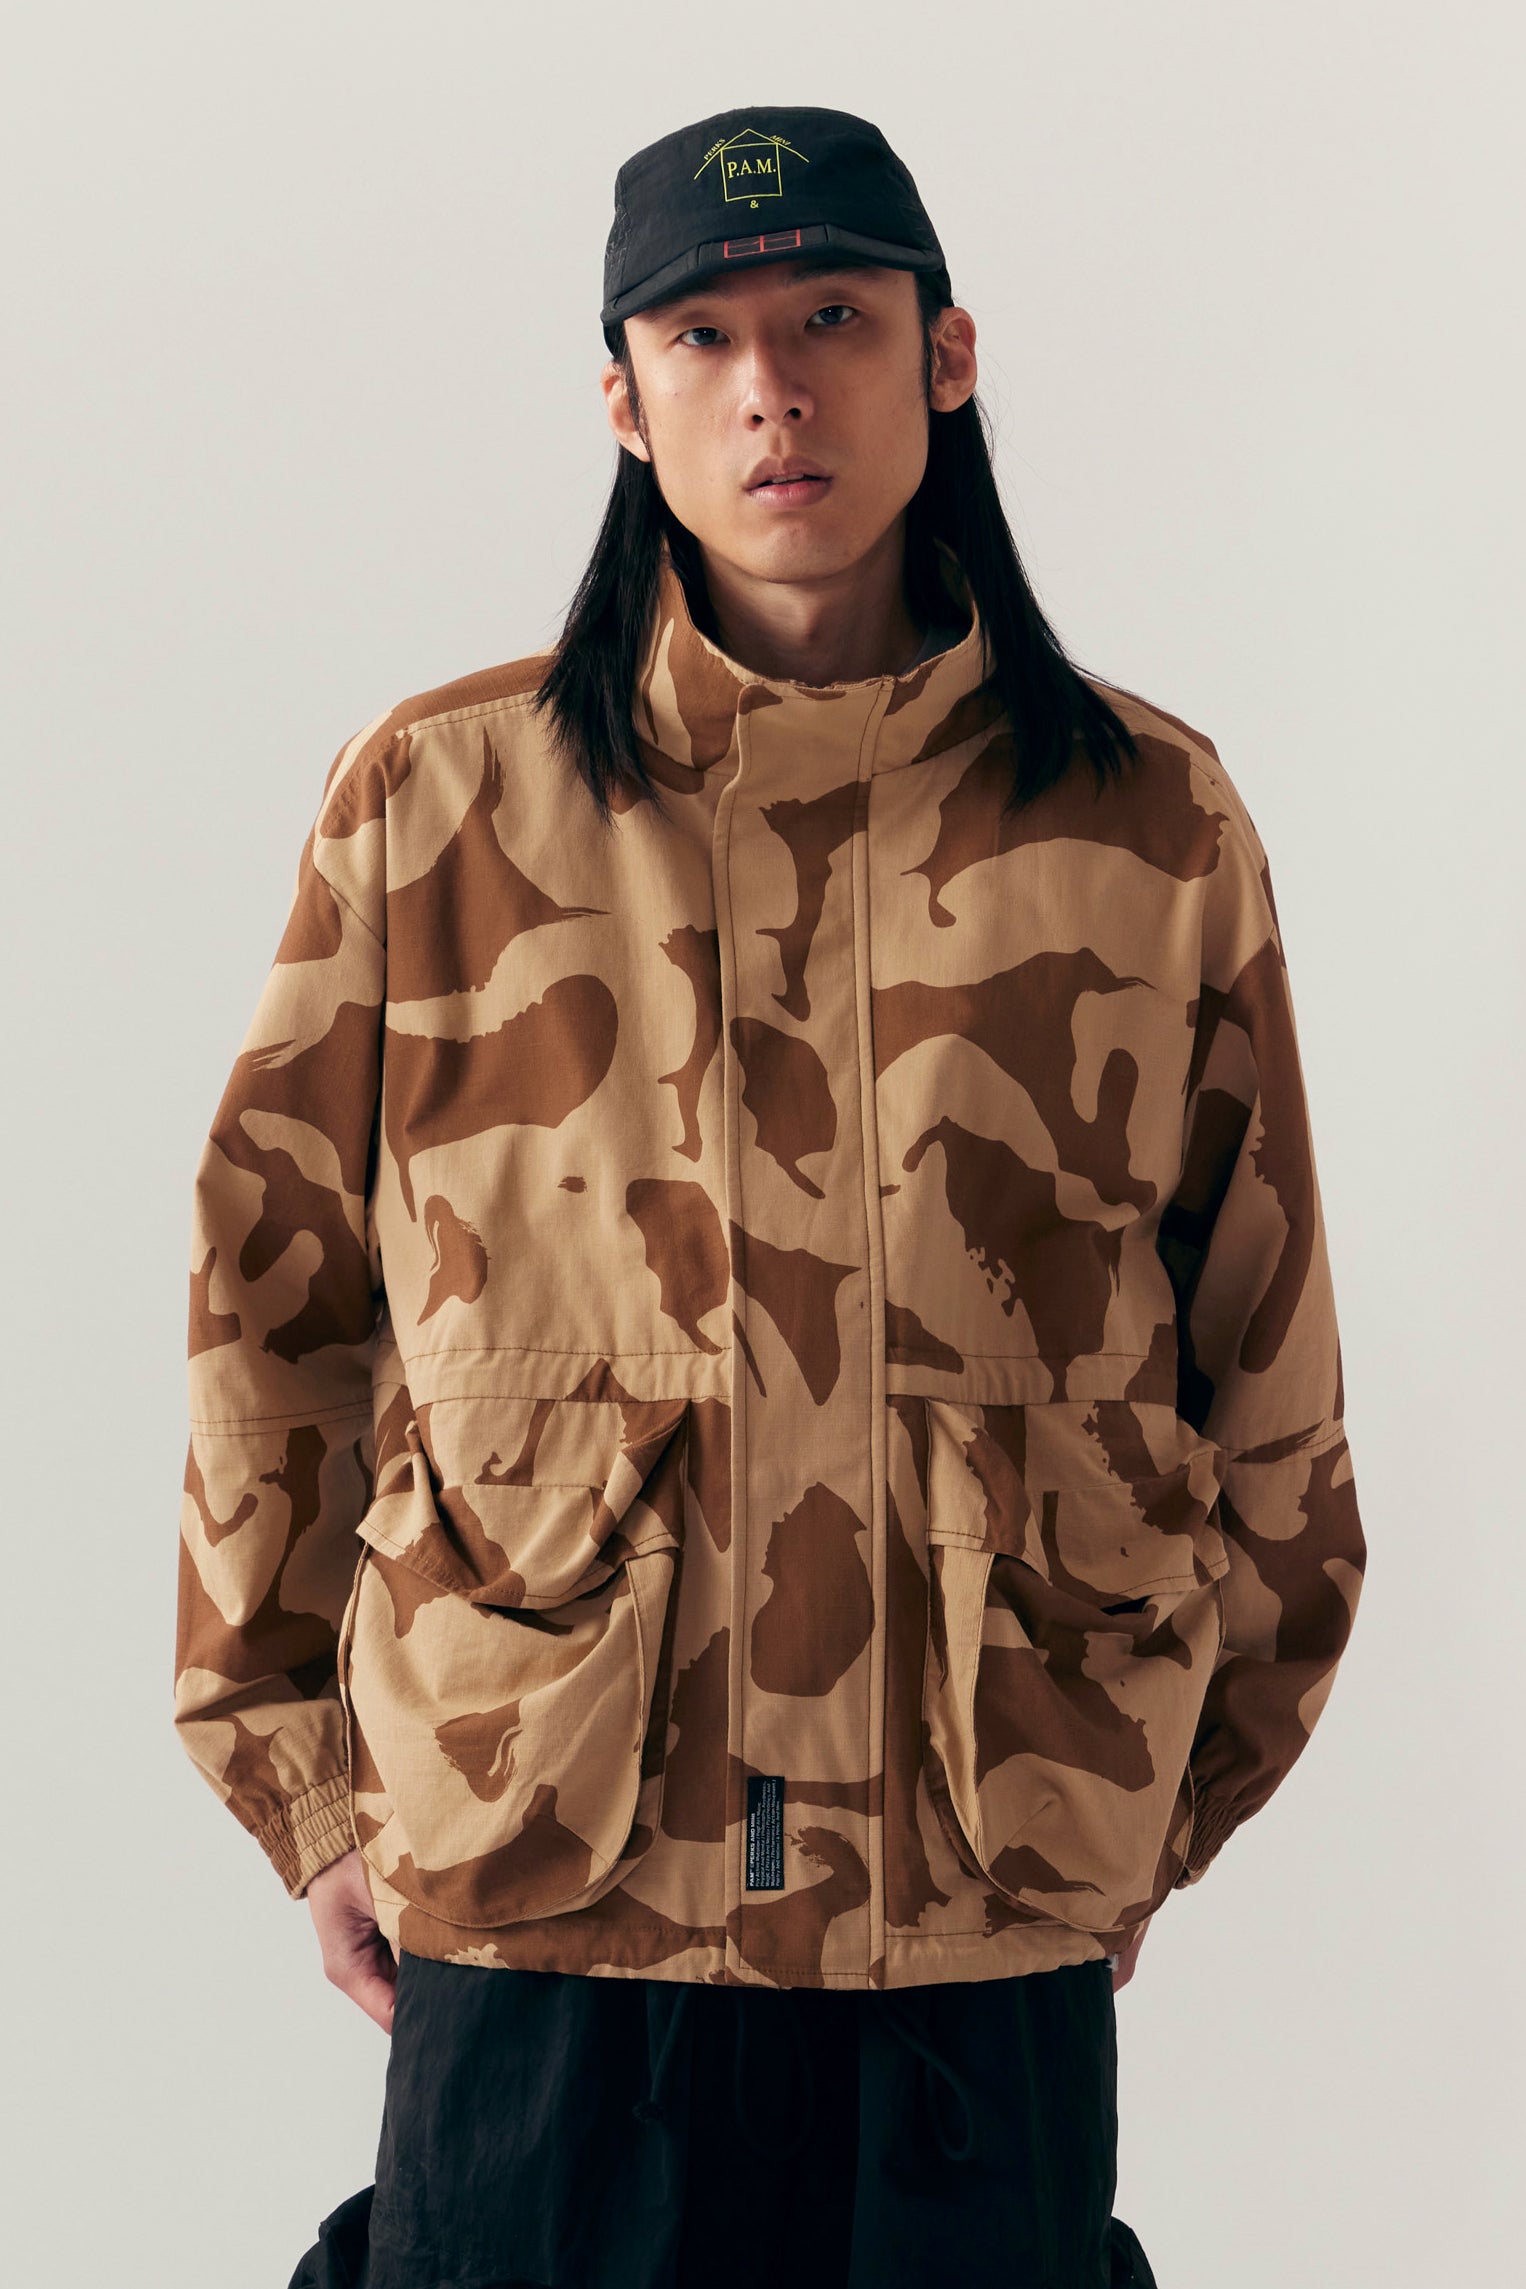 The TRANSGRESSION PARKA JACKET  available online with global shipping, and in PAM Stores Melbourne and Sydney.